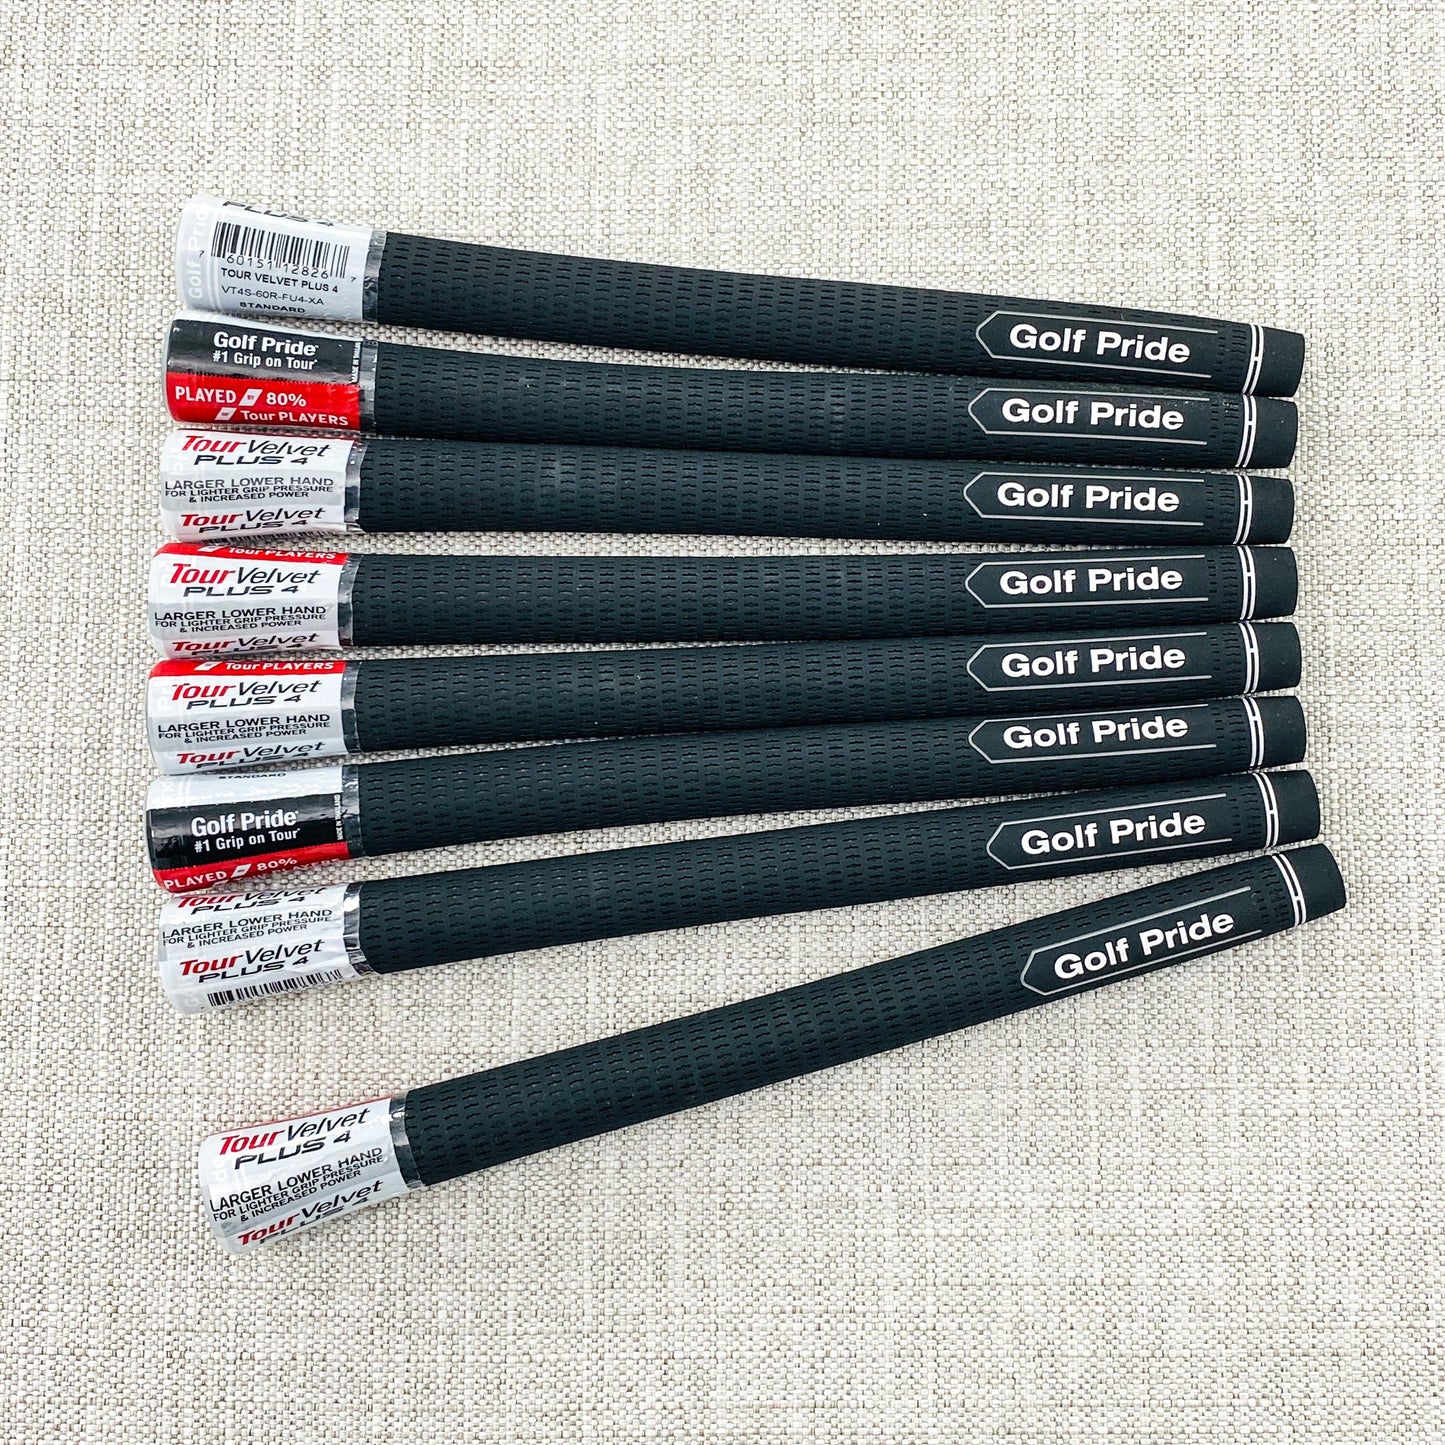 Golf Pride Tour Velvet +4 swing grip. Choice of size. Black - Price includes fitment.